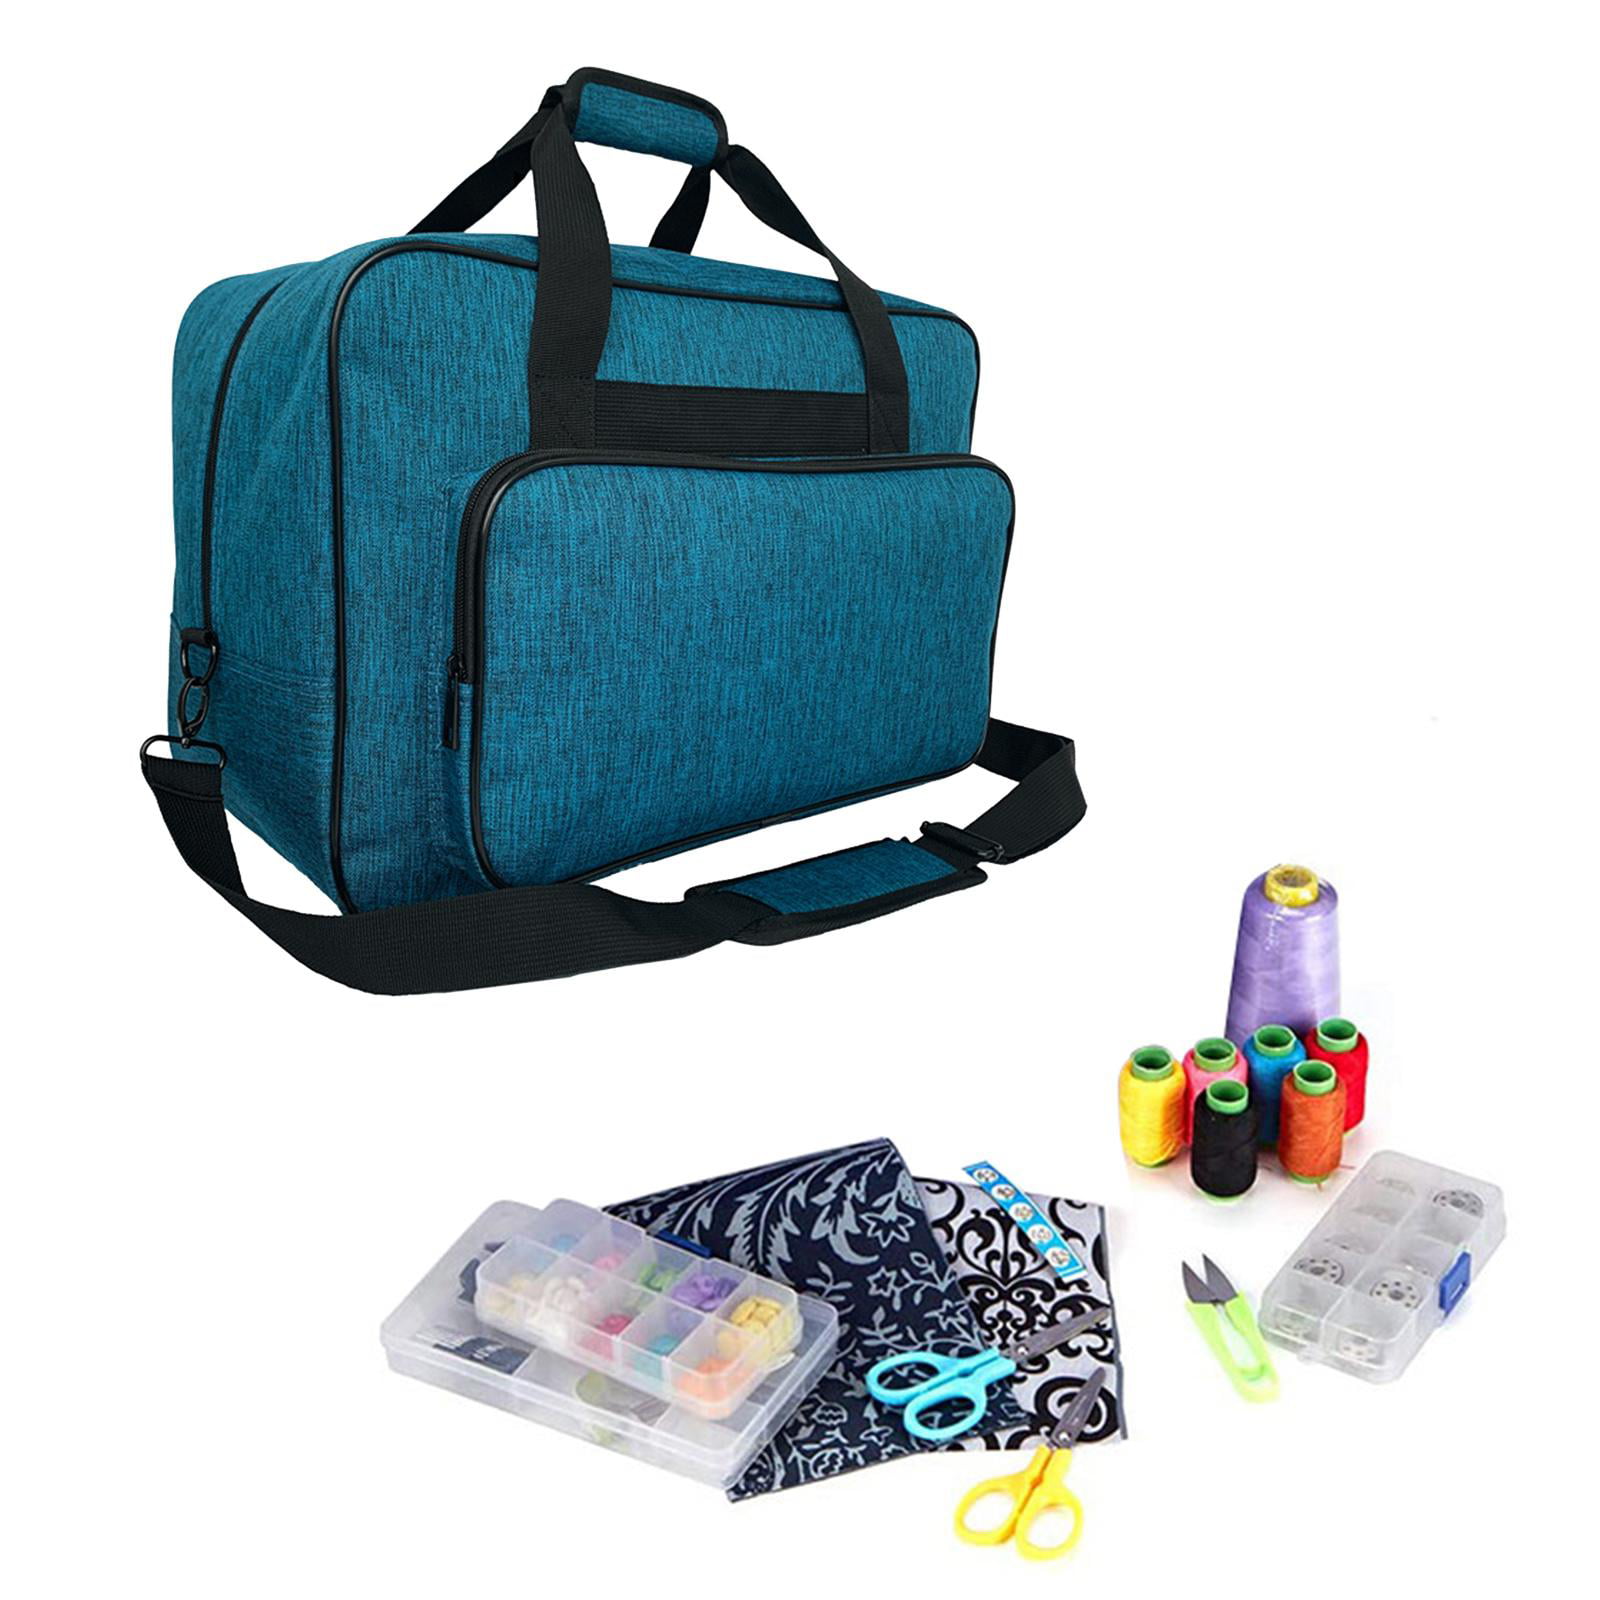 Sewing Machine Carrying Case with Multiple Storage Pockets, Portable Tote  Bag with Handle, Travel Handbag for Most Sewing Machines and Accessories -  Light Blue 